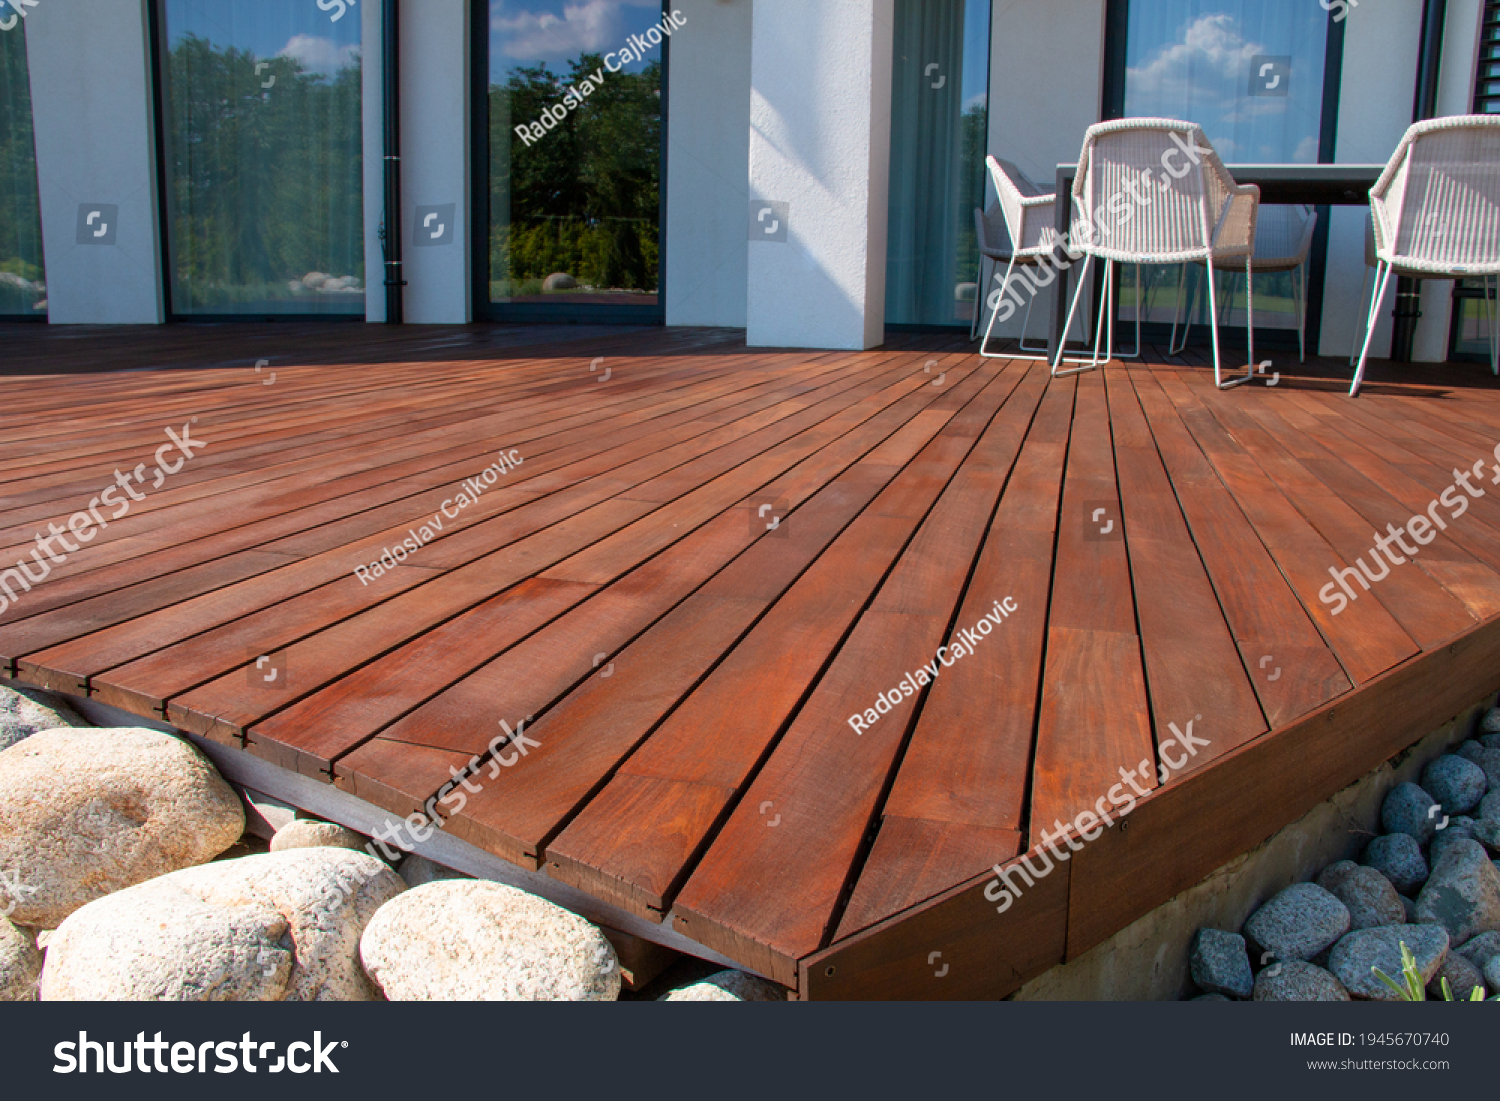 Ipe wood deck, modern house design with wooden patio, low angle view of tropical hardwood decking #1945670740